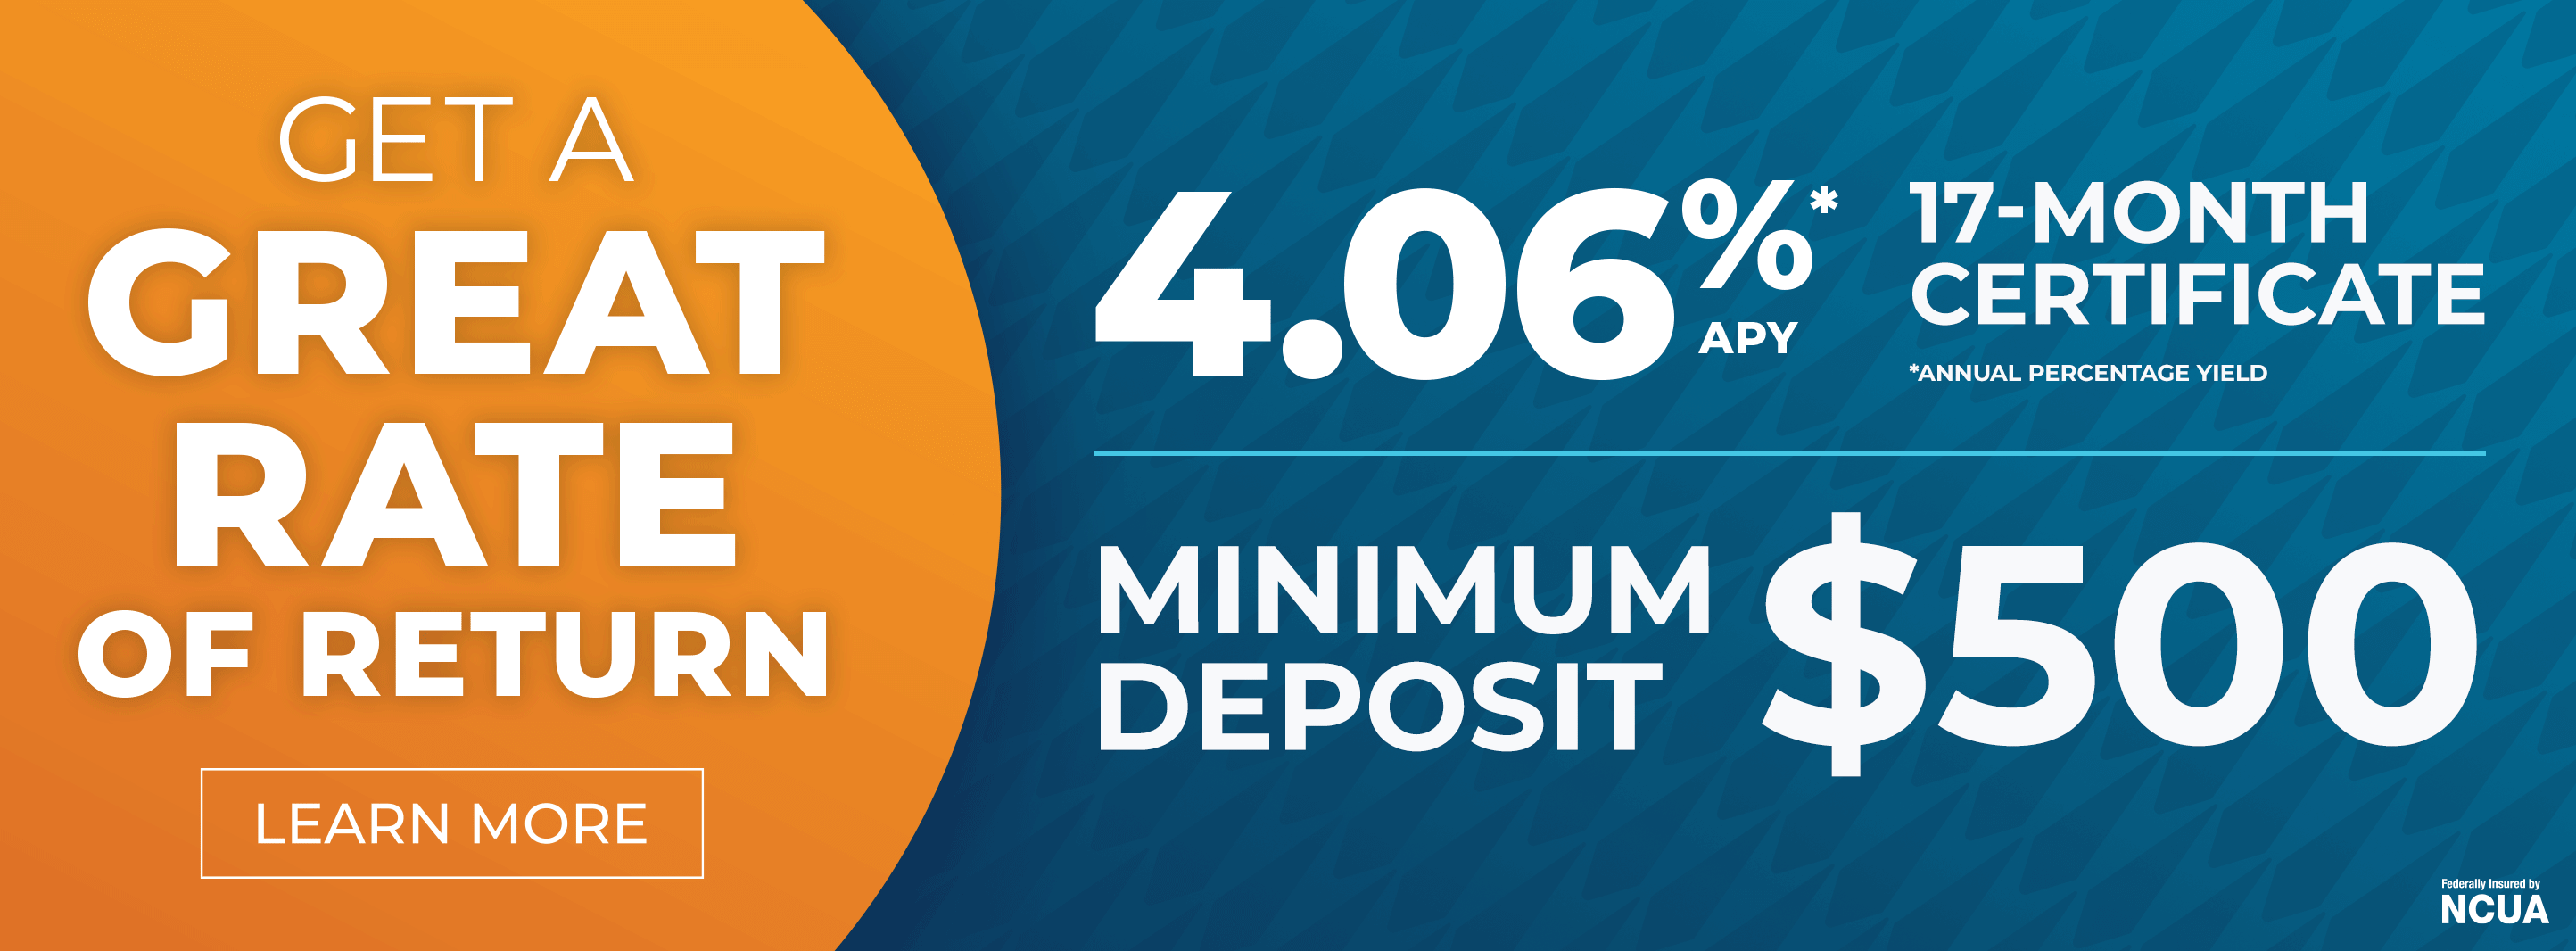 Get a great rate of return 4.06% APY* 17-month certificate *annual percentage yield Minimum Deposit $500 Learn More